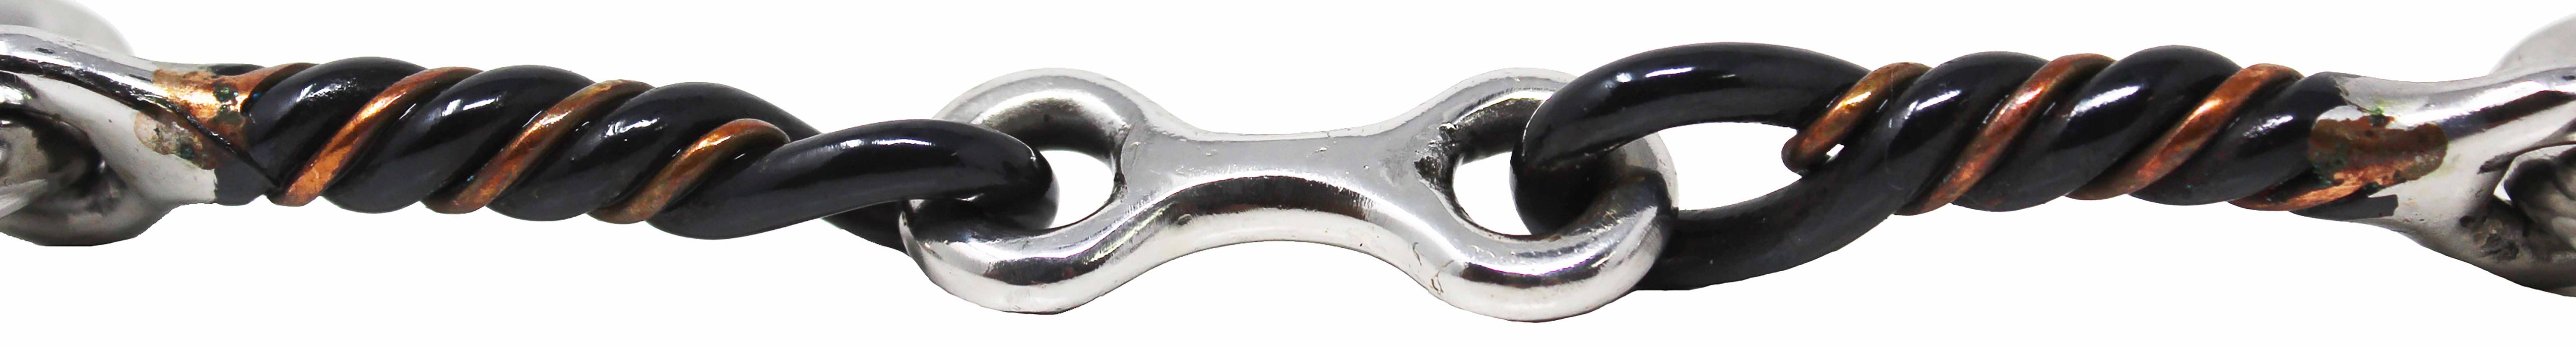 SS Loose Ring   Mouth 3-Piece Sweet Iron Twisted Dog Bone Snaffle Bit 35642